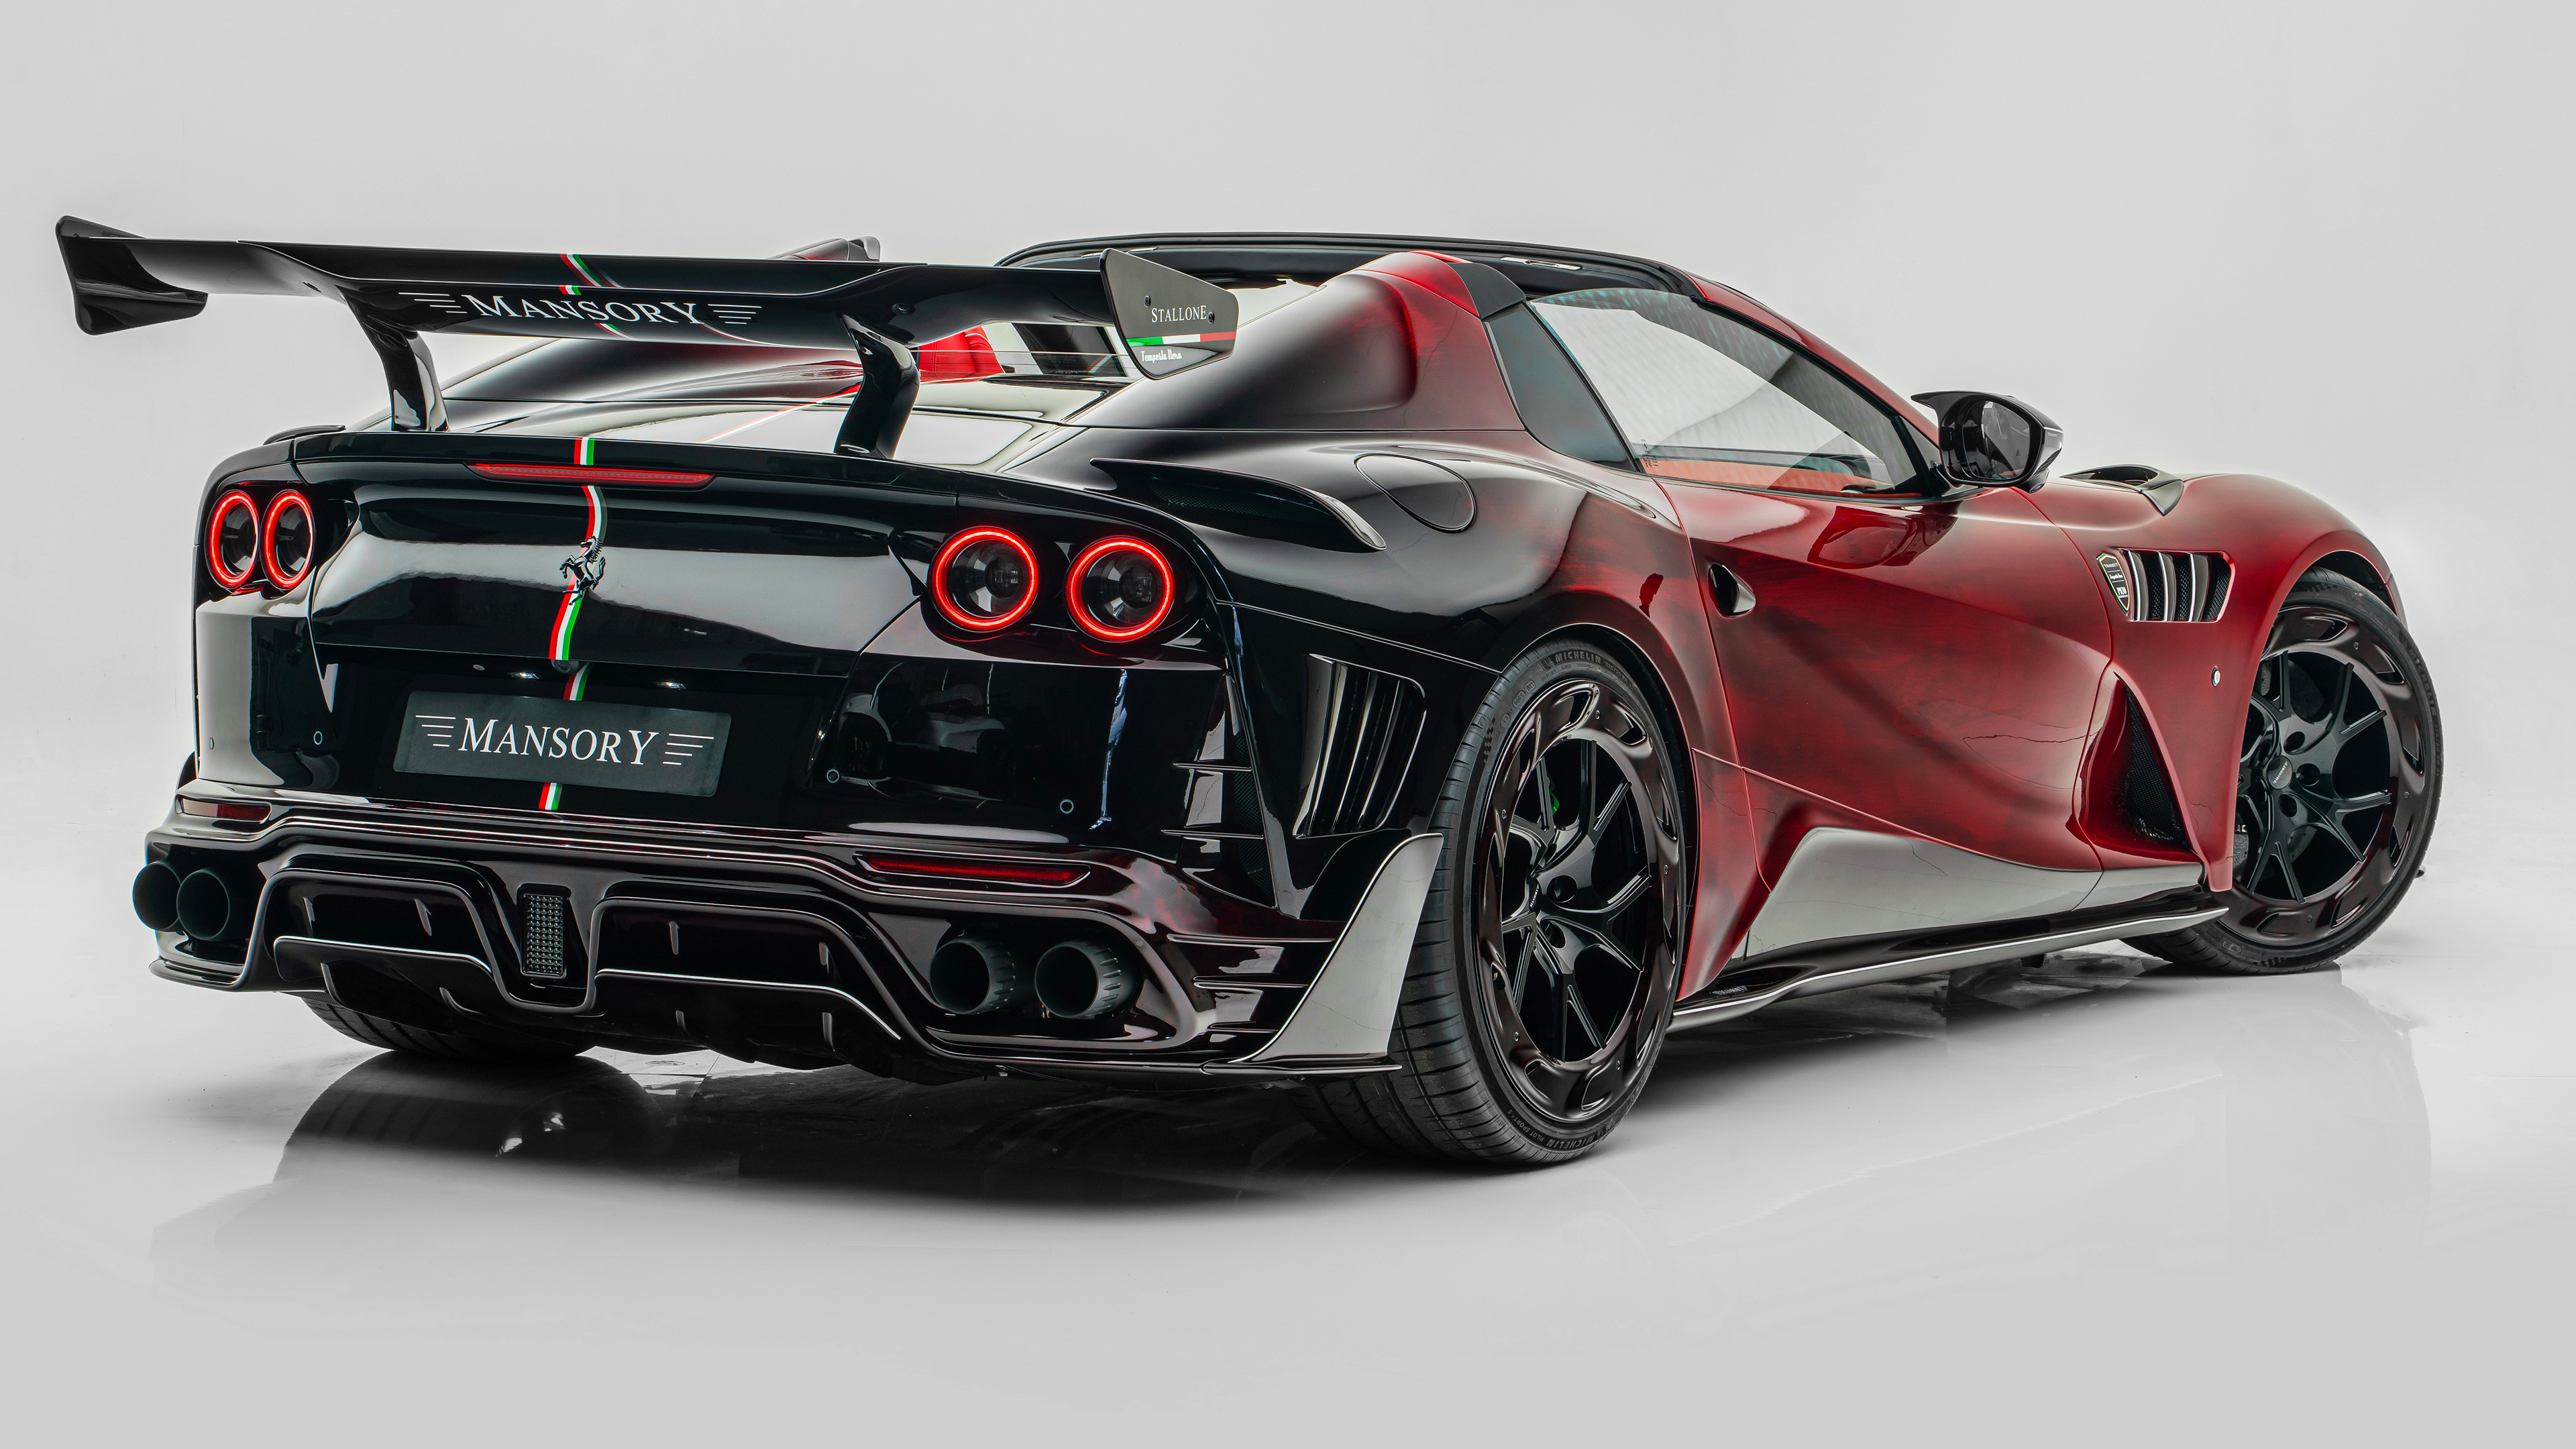 General 3840x2160 Mansory Ferrari sports car vehicle tuning bodykit simple background car white background rear view licence plates taillights italian cars Stellantis car spoiler rear wing